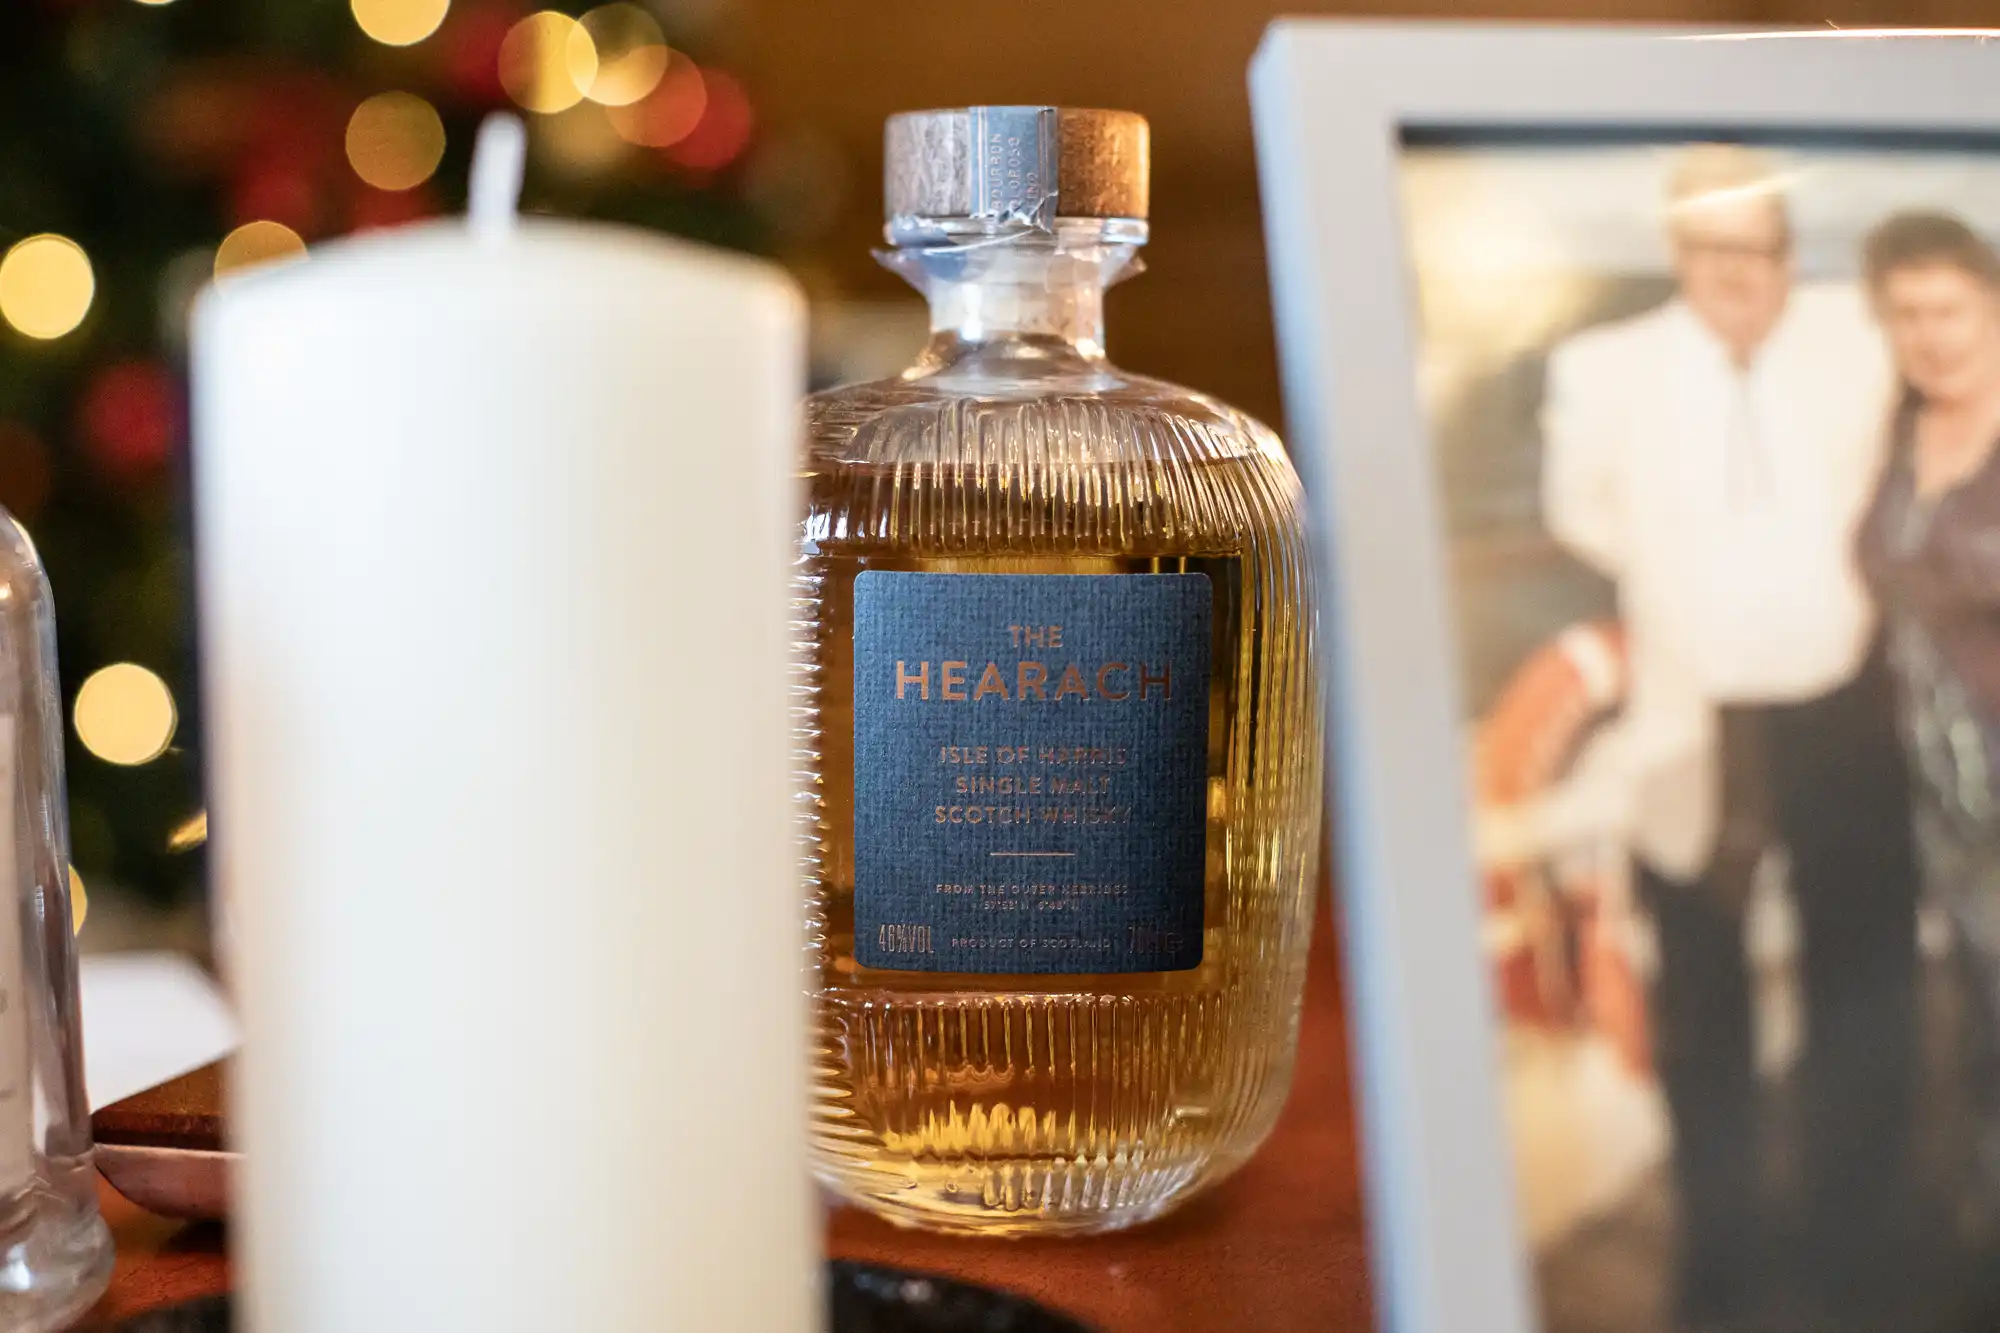 A bottle of The Hearach Isle of Harris Single Malt Scotch Whisky sits on a table next to a framed photo and a white candle.